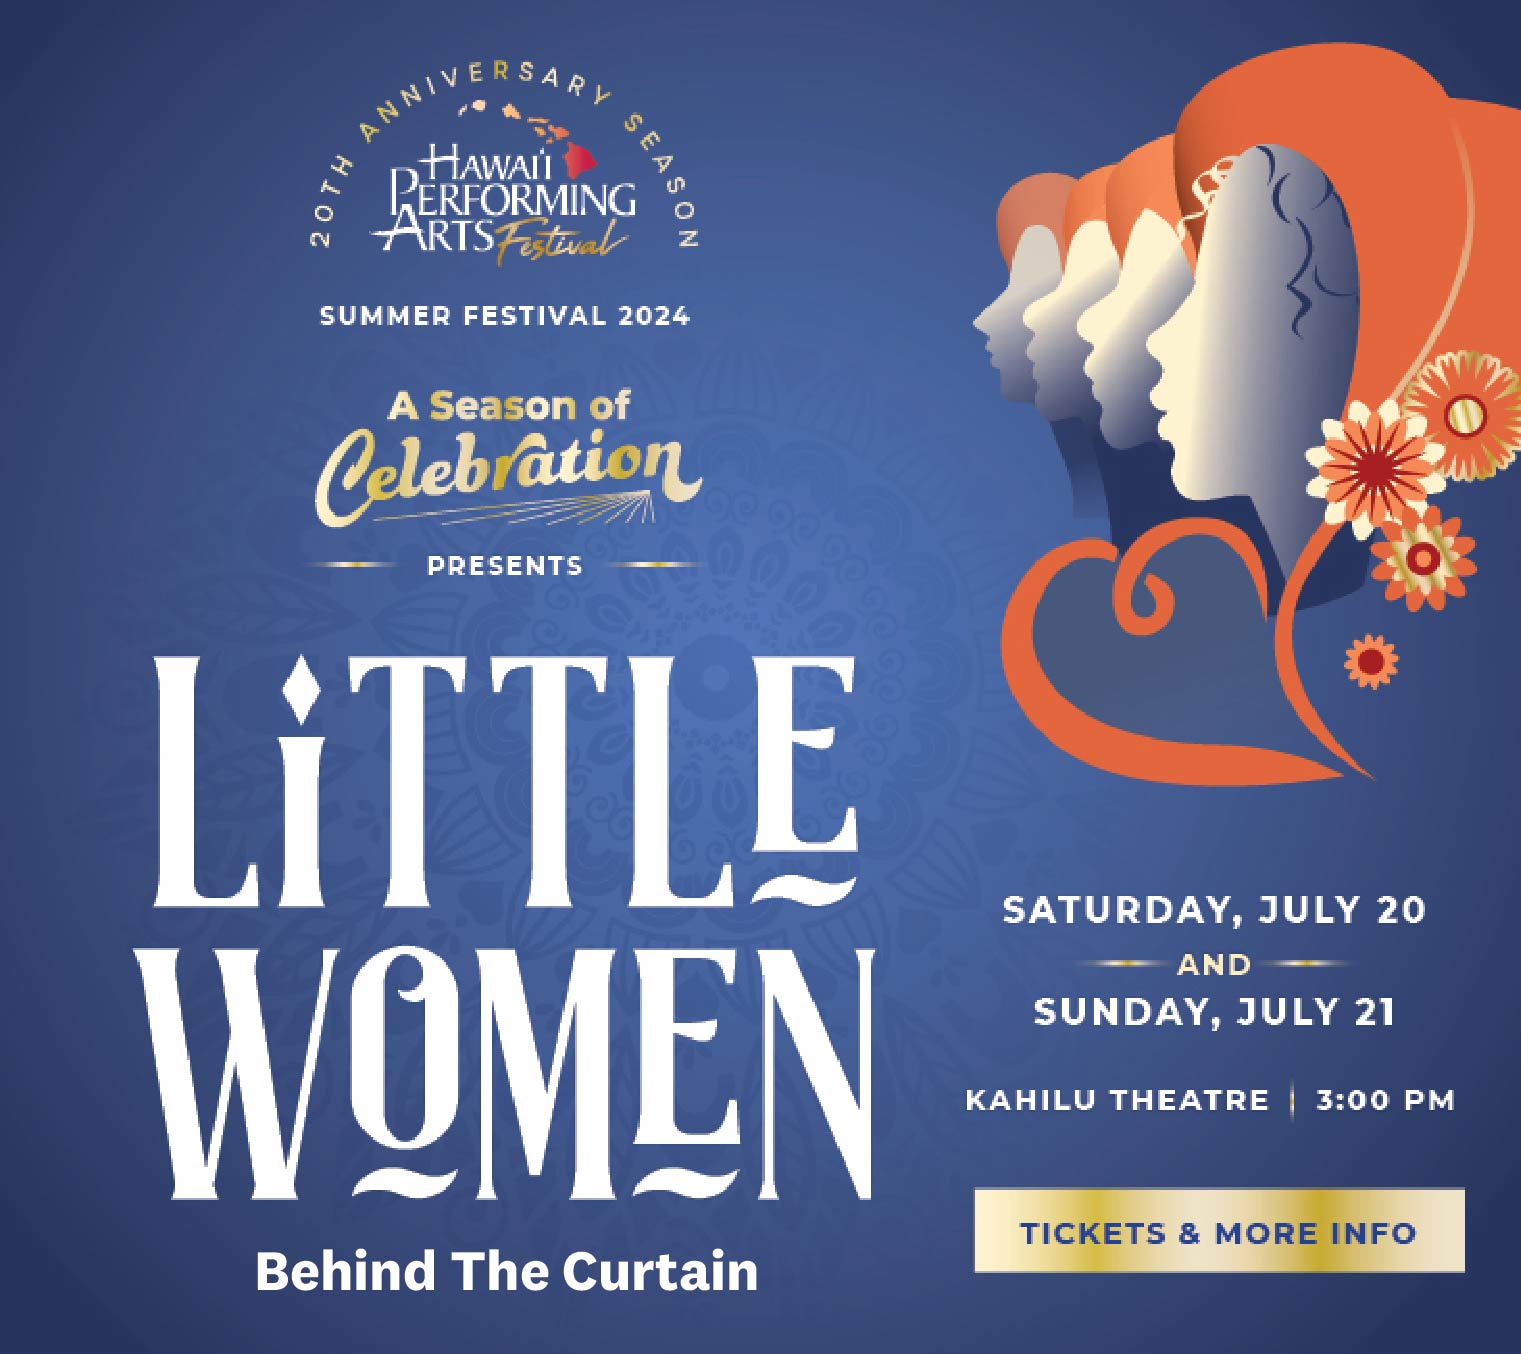 Poster for Hawaii Performing Arts Festival's 2024 Summer Festival featuring "Little Women: Behind The Curtain" at Kahilu Theatre on July 20-21 at 3:00 PM. Includes an image of a woman's silhouette.